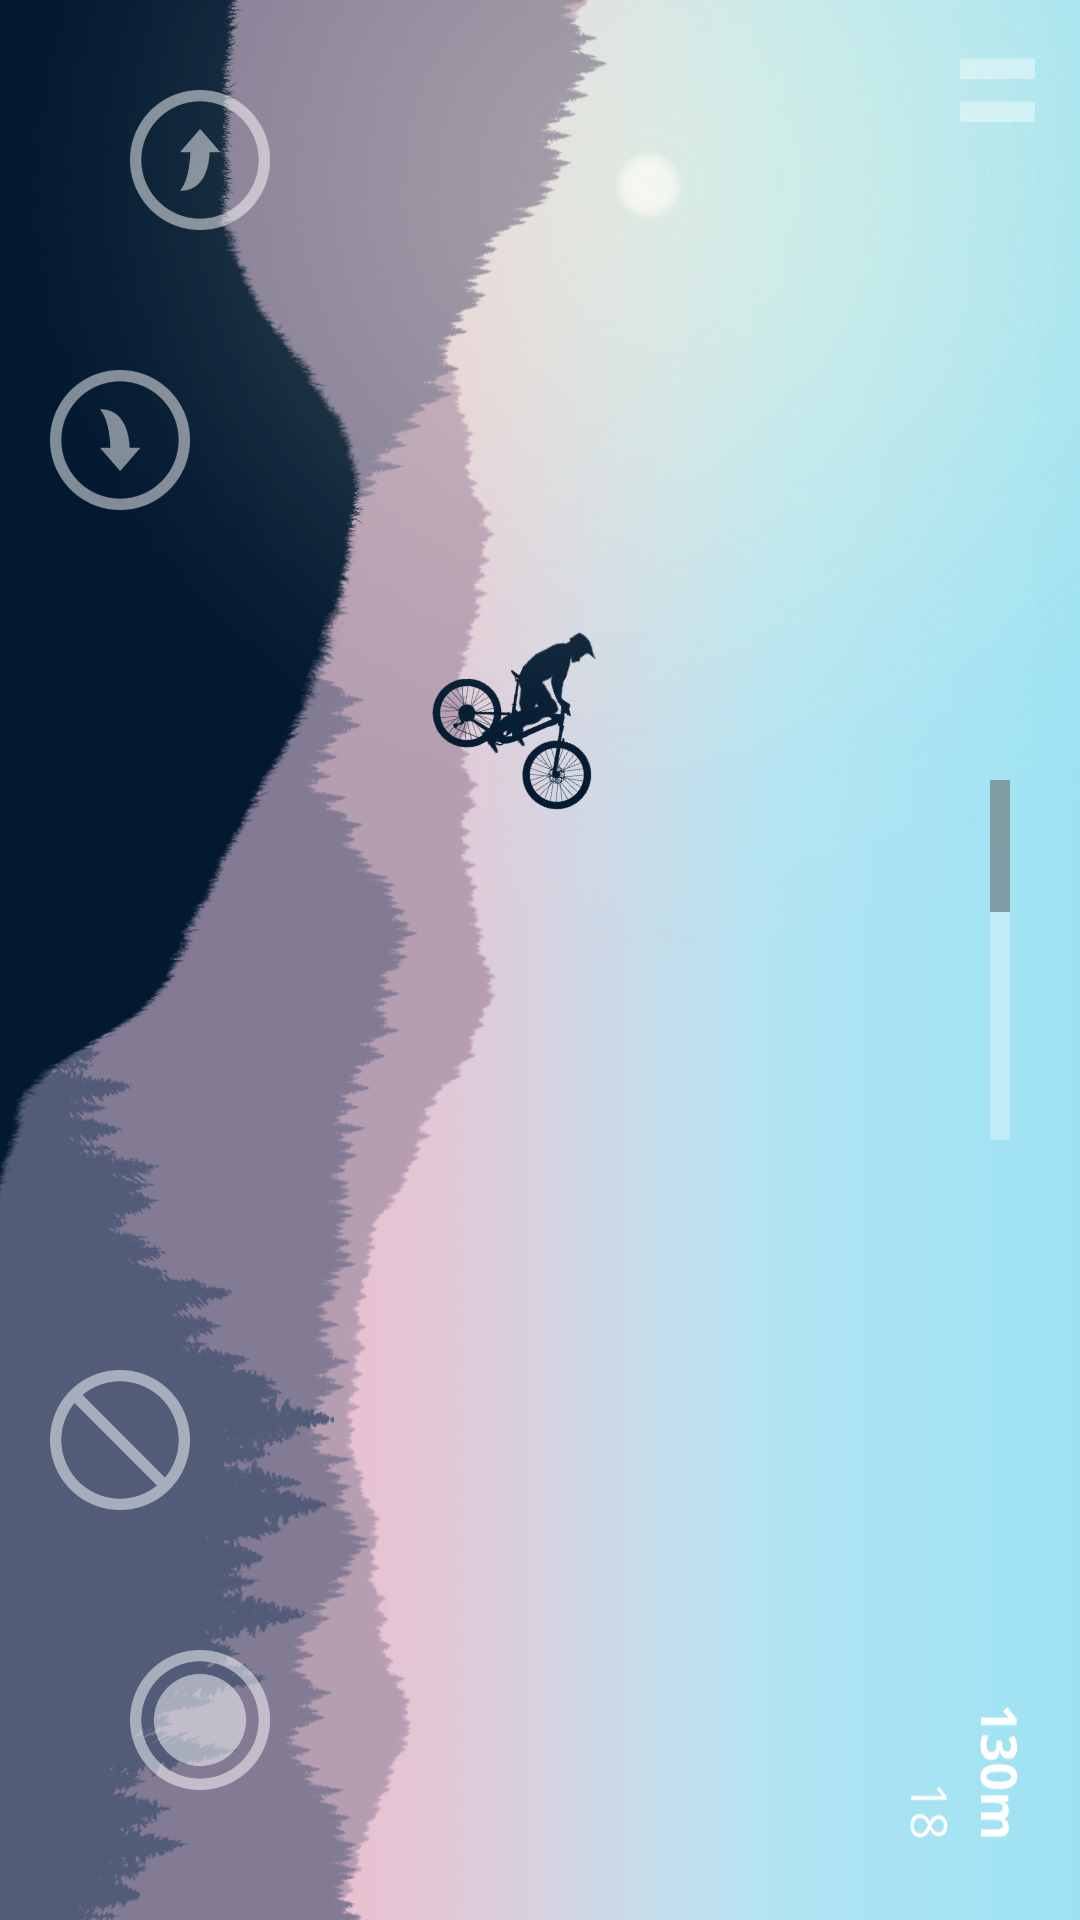 Mountain Bike Xtreme(Unlimited skill points)